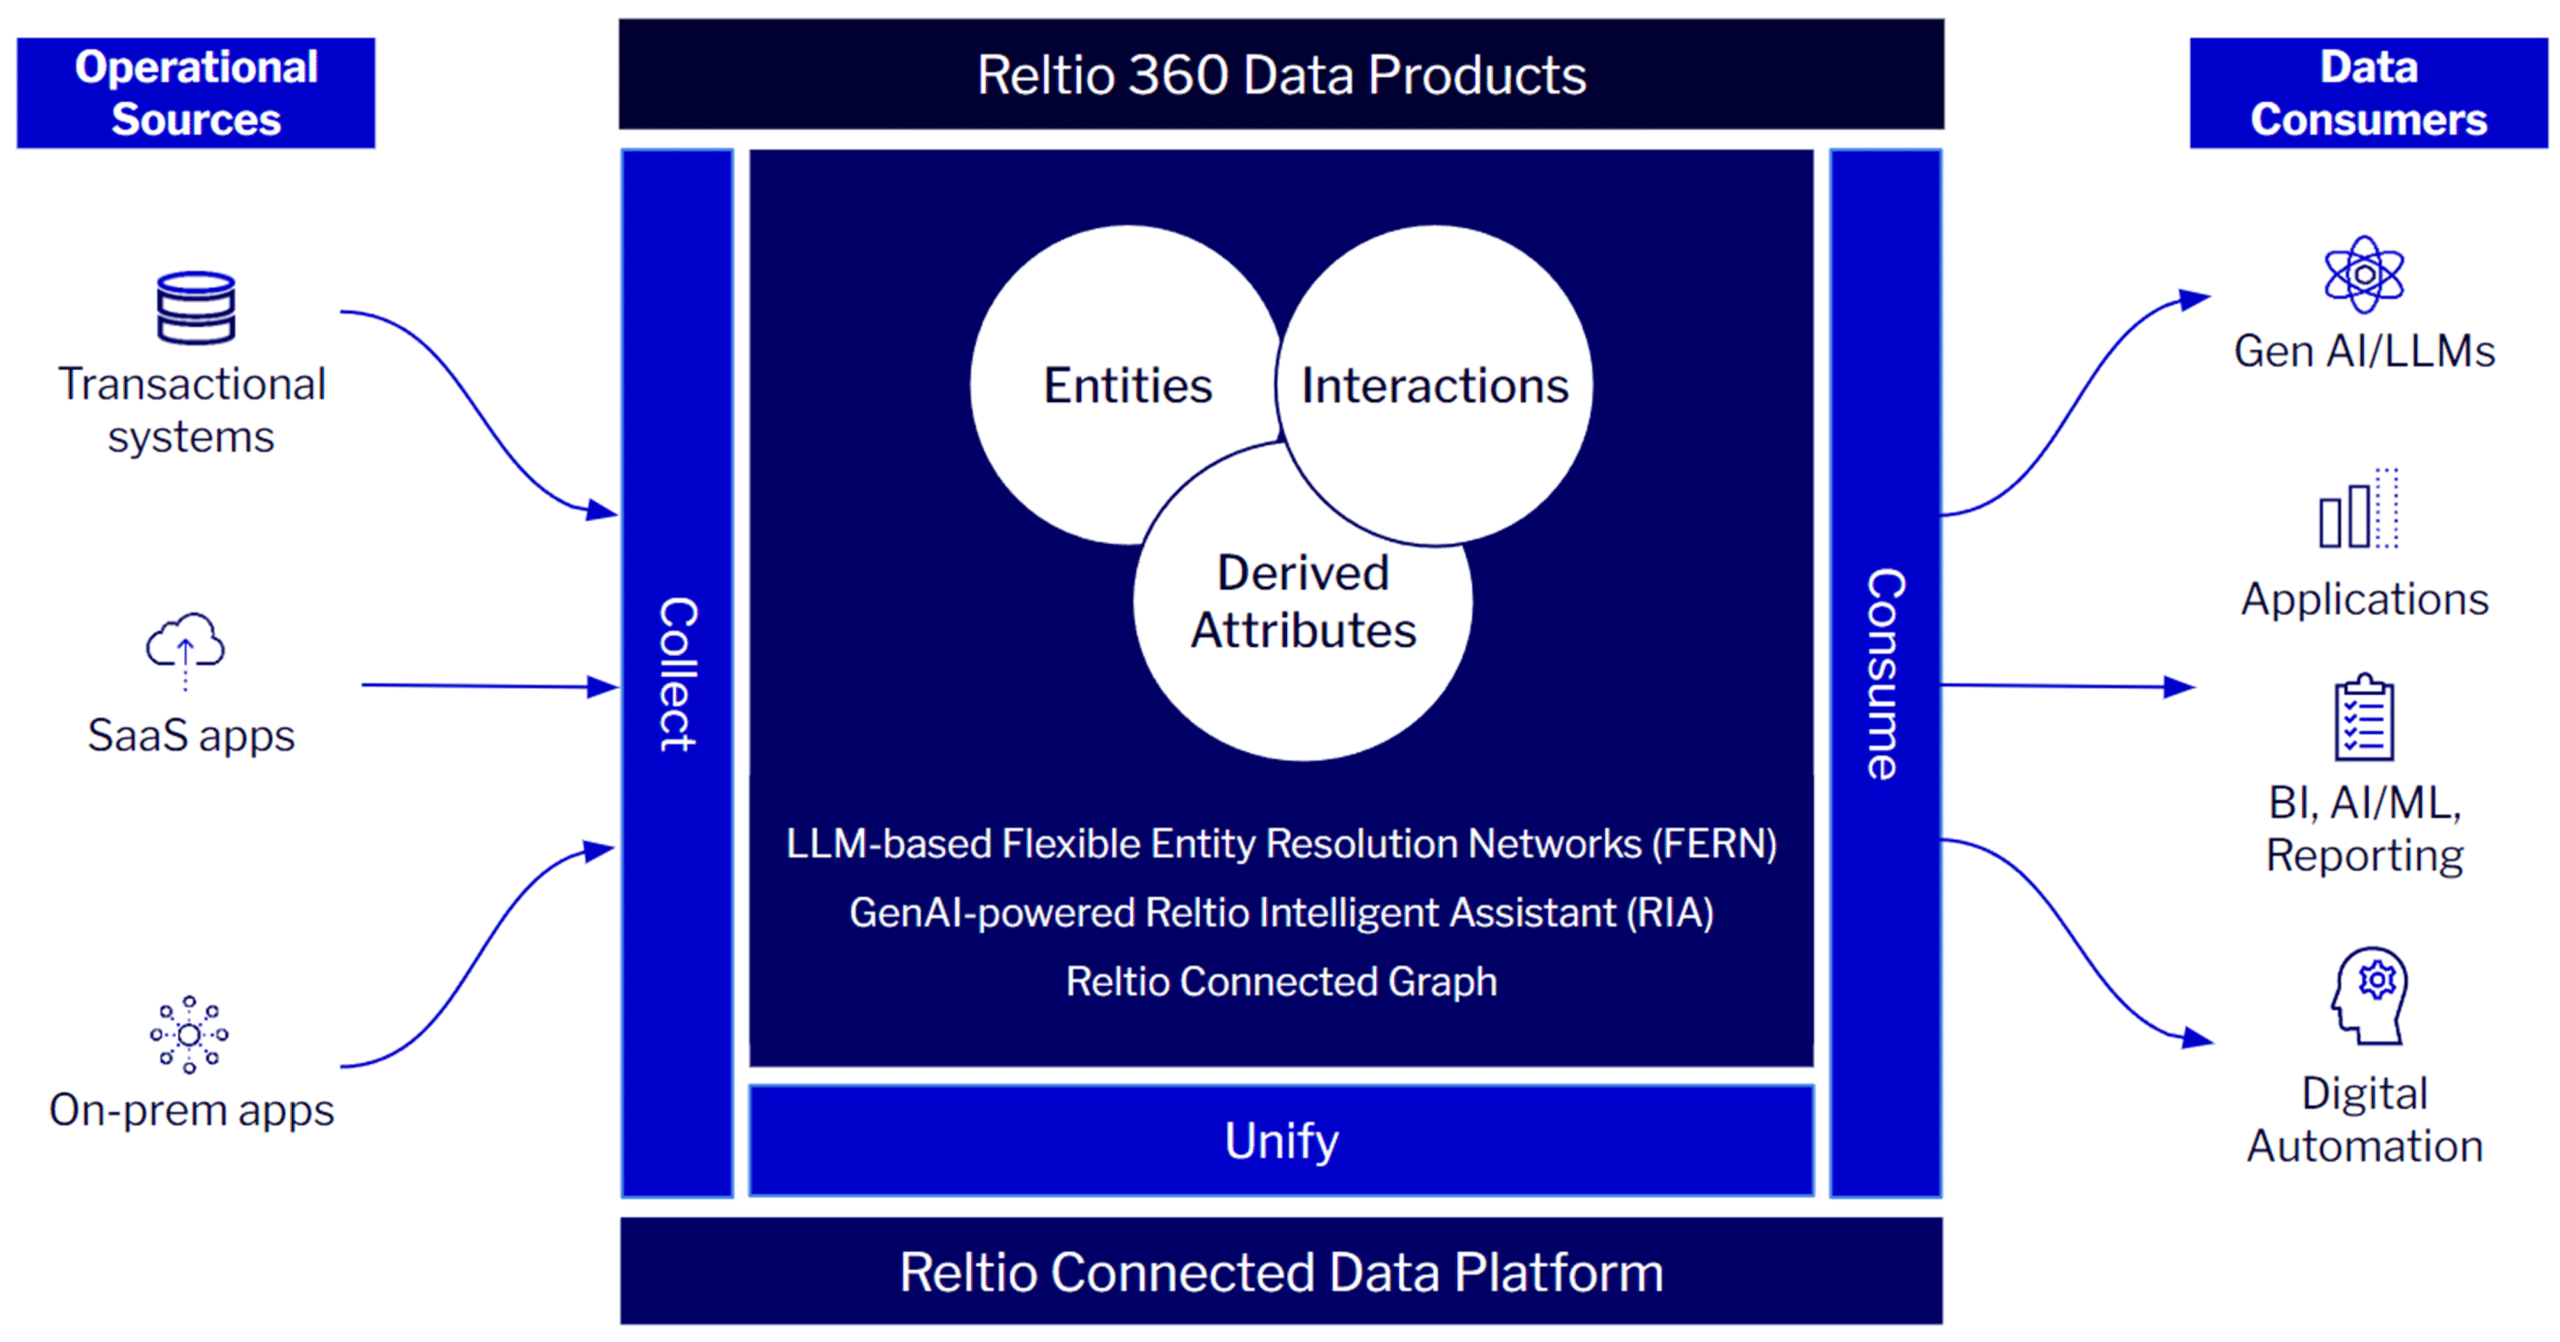 Reltio Approach to Data Products 300dpi (1)